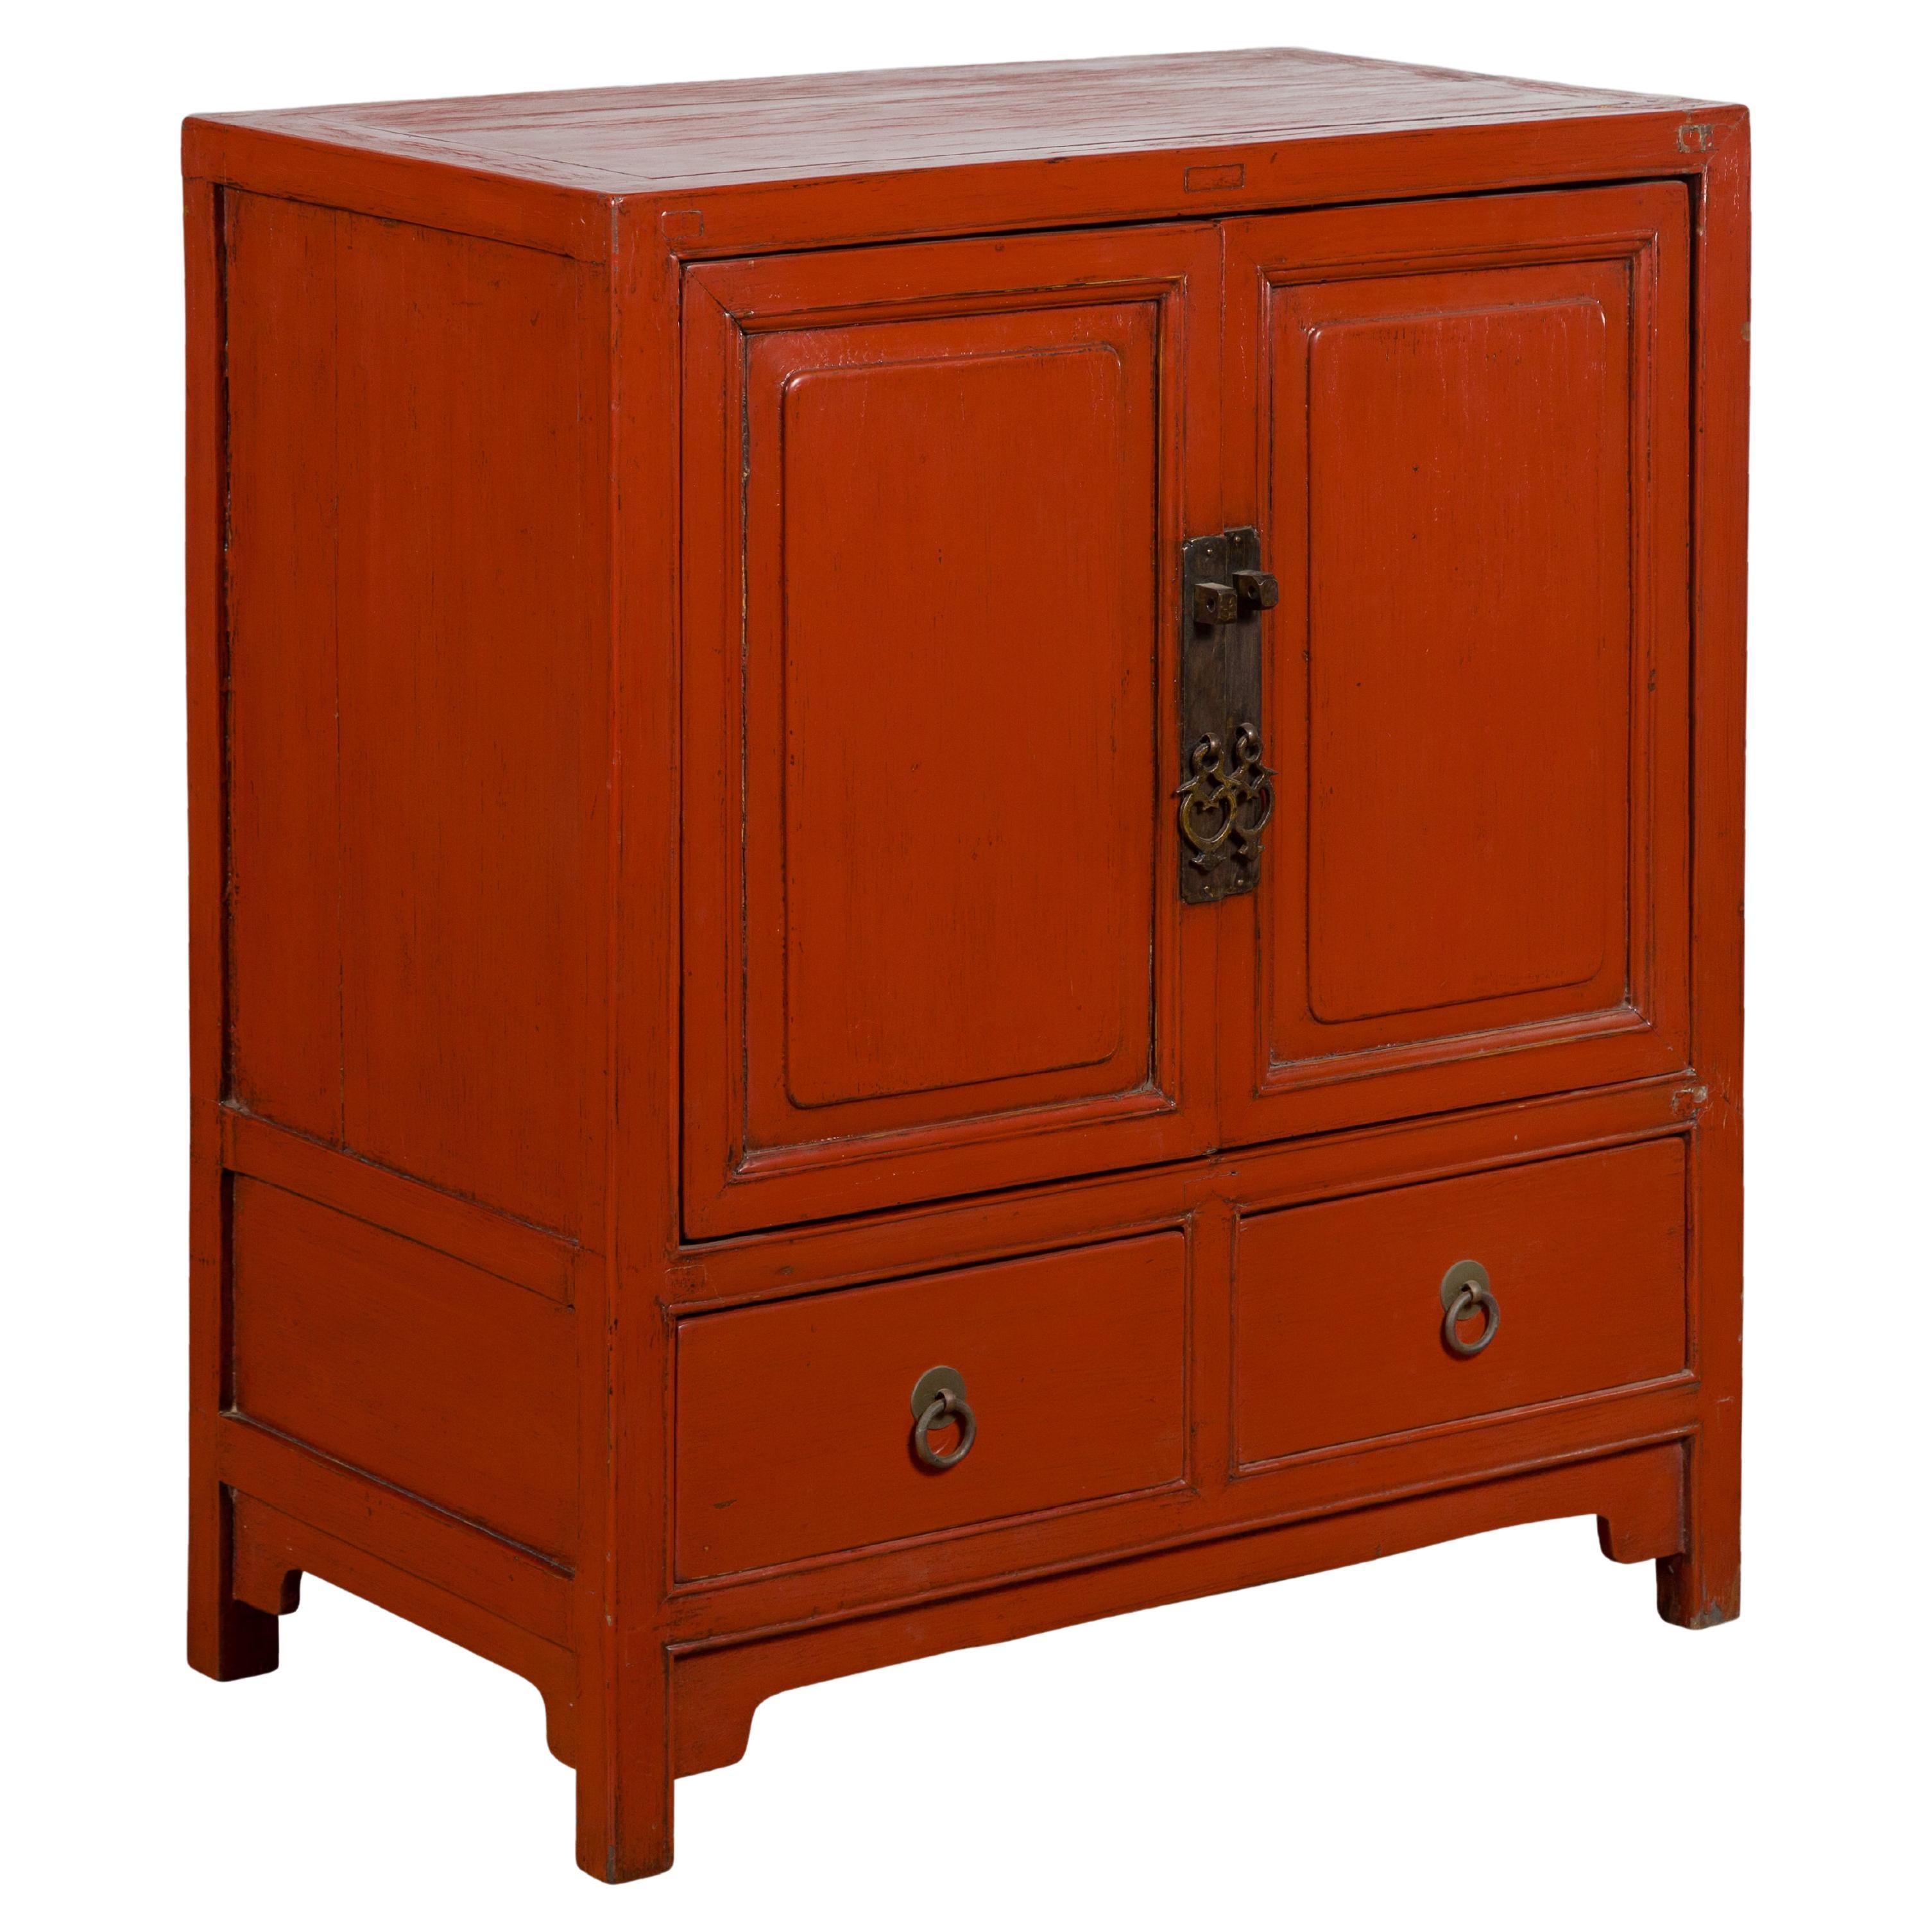 Chinese Qing Dynasty 19th Century Red Lacquer Cabinet with Doors and Drawers For Sale